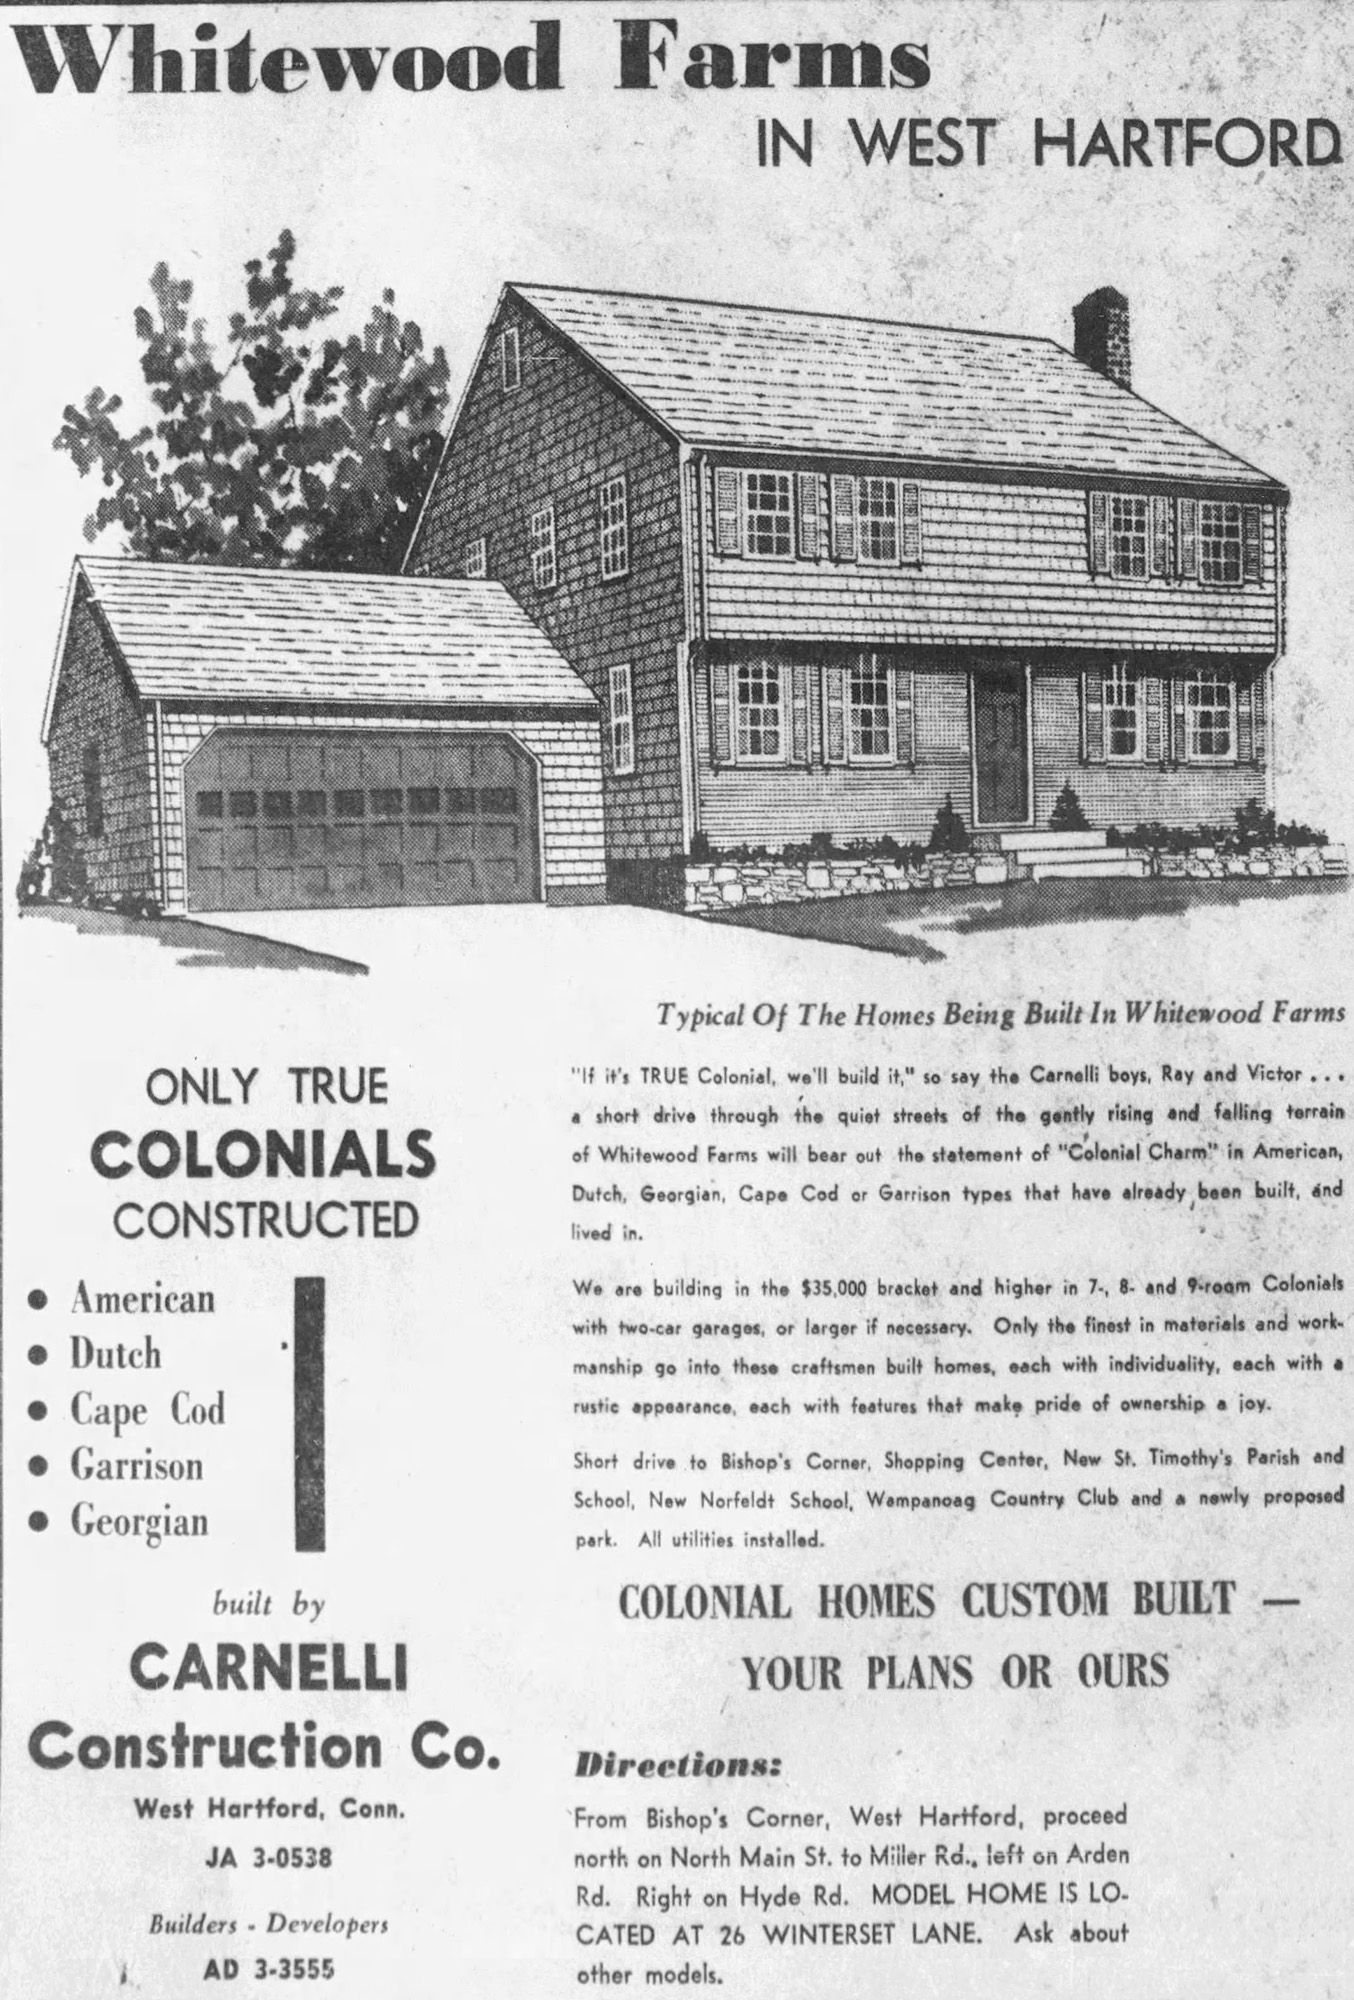 Brothers Raymond and Victor Carnelli's construction company developed hundreds of West Hartford houses between 1945 and 1970. Whitewood Farms showcases the subtlety of steering, encouraging Christian buyers to consider these homes, rather than Jewish home buyers or people of color.